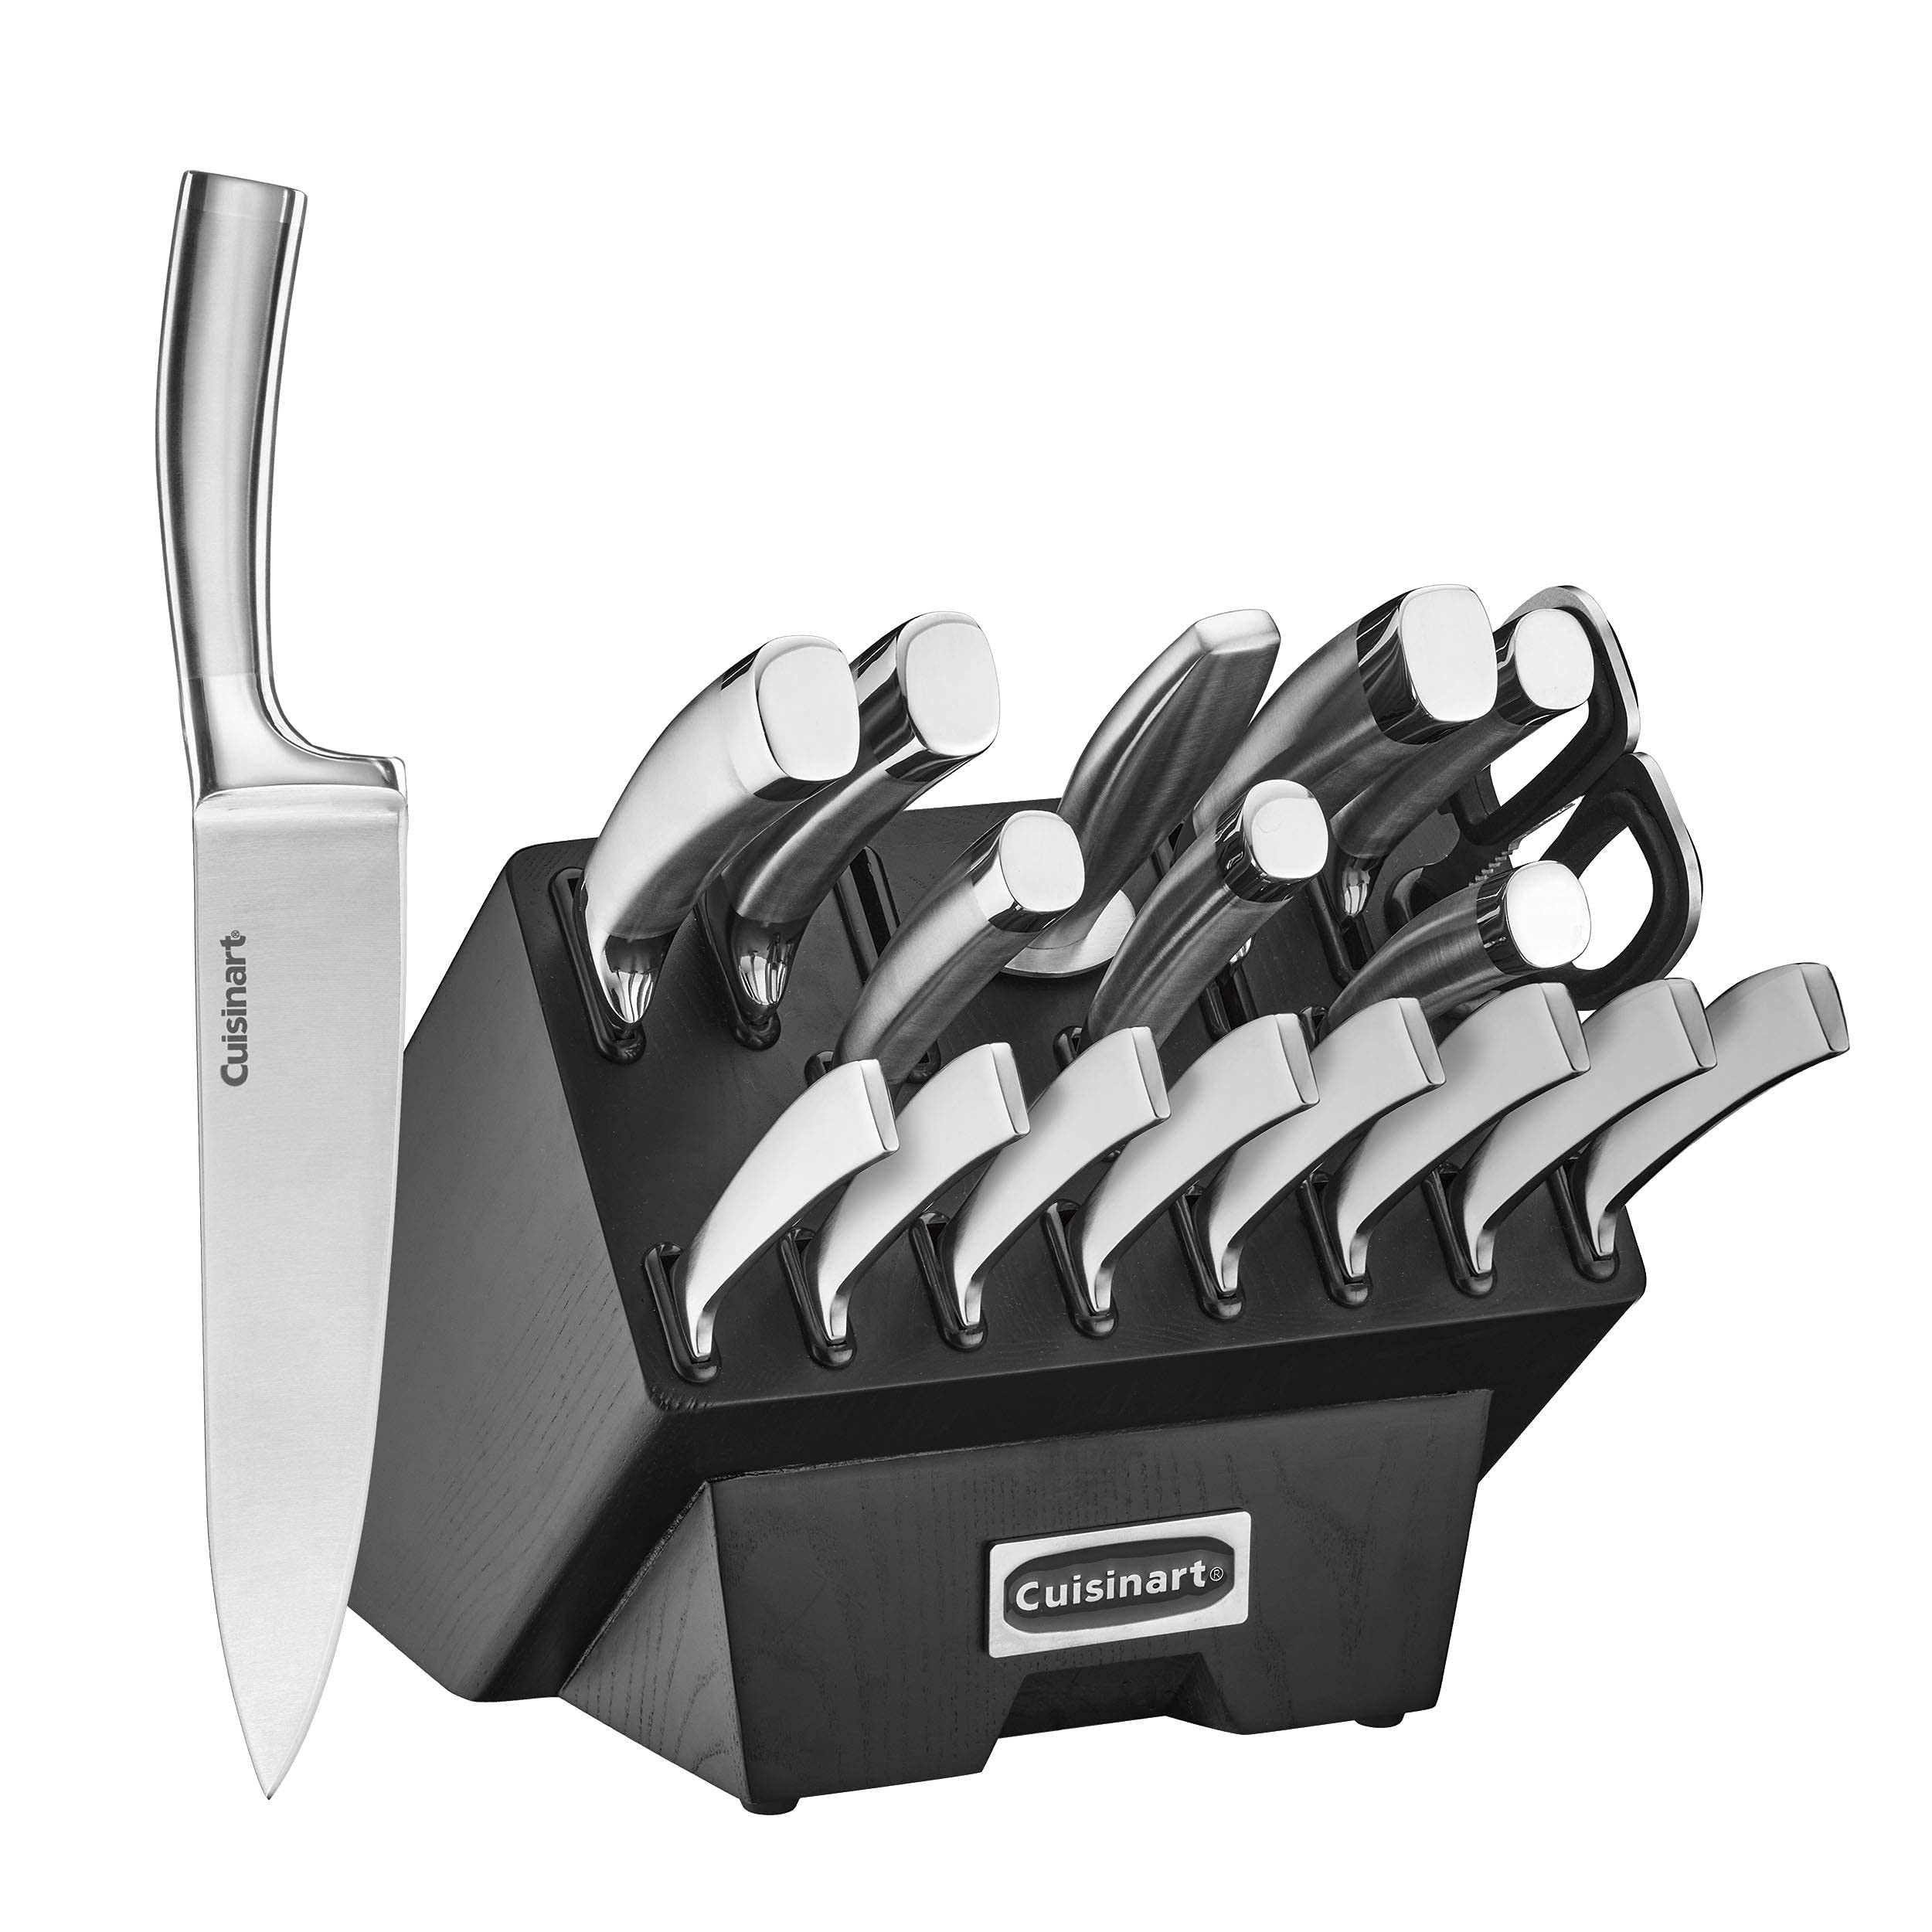  Cuisinart C77SS-17P 17-Piece Artiste Collection Cutlery Knife  Block Set, Stainless Steel Includes Cuisinart Bamboo Cutting Board and Measuring  Spoons: Home & Kitchen